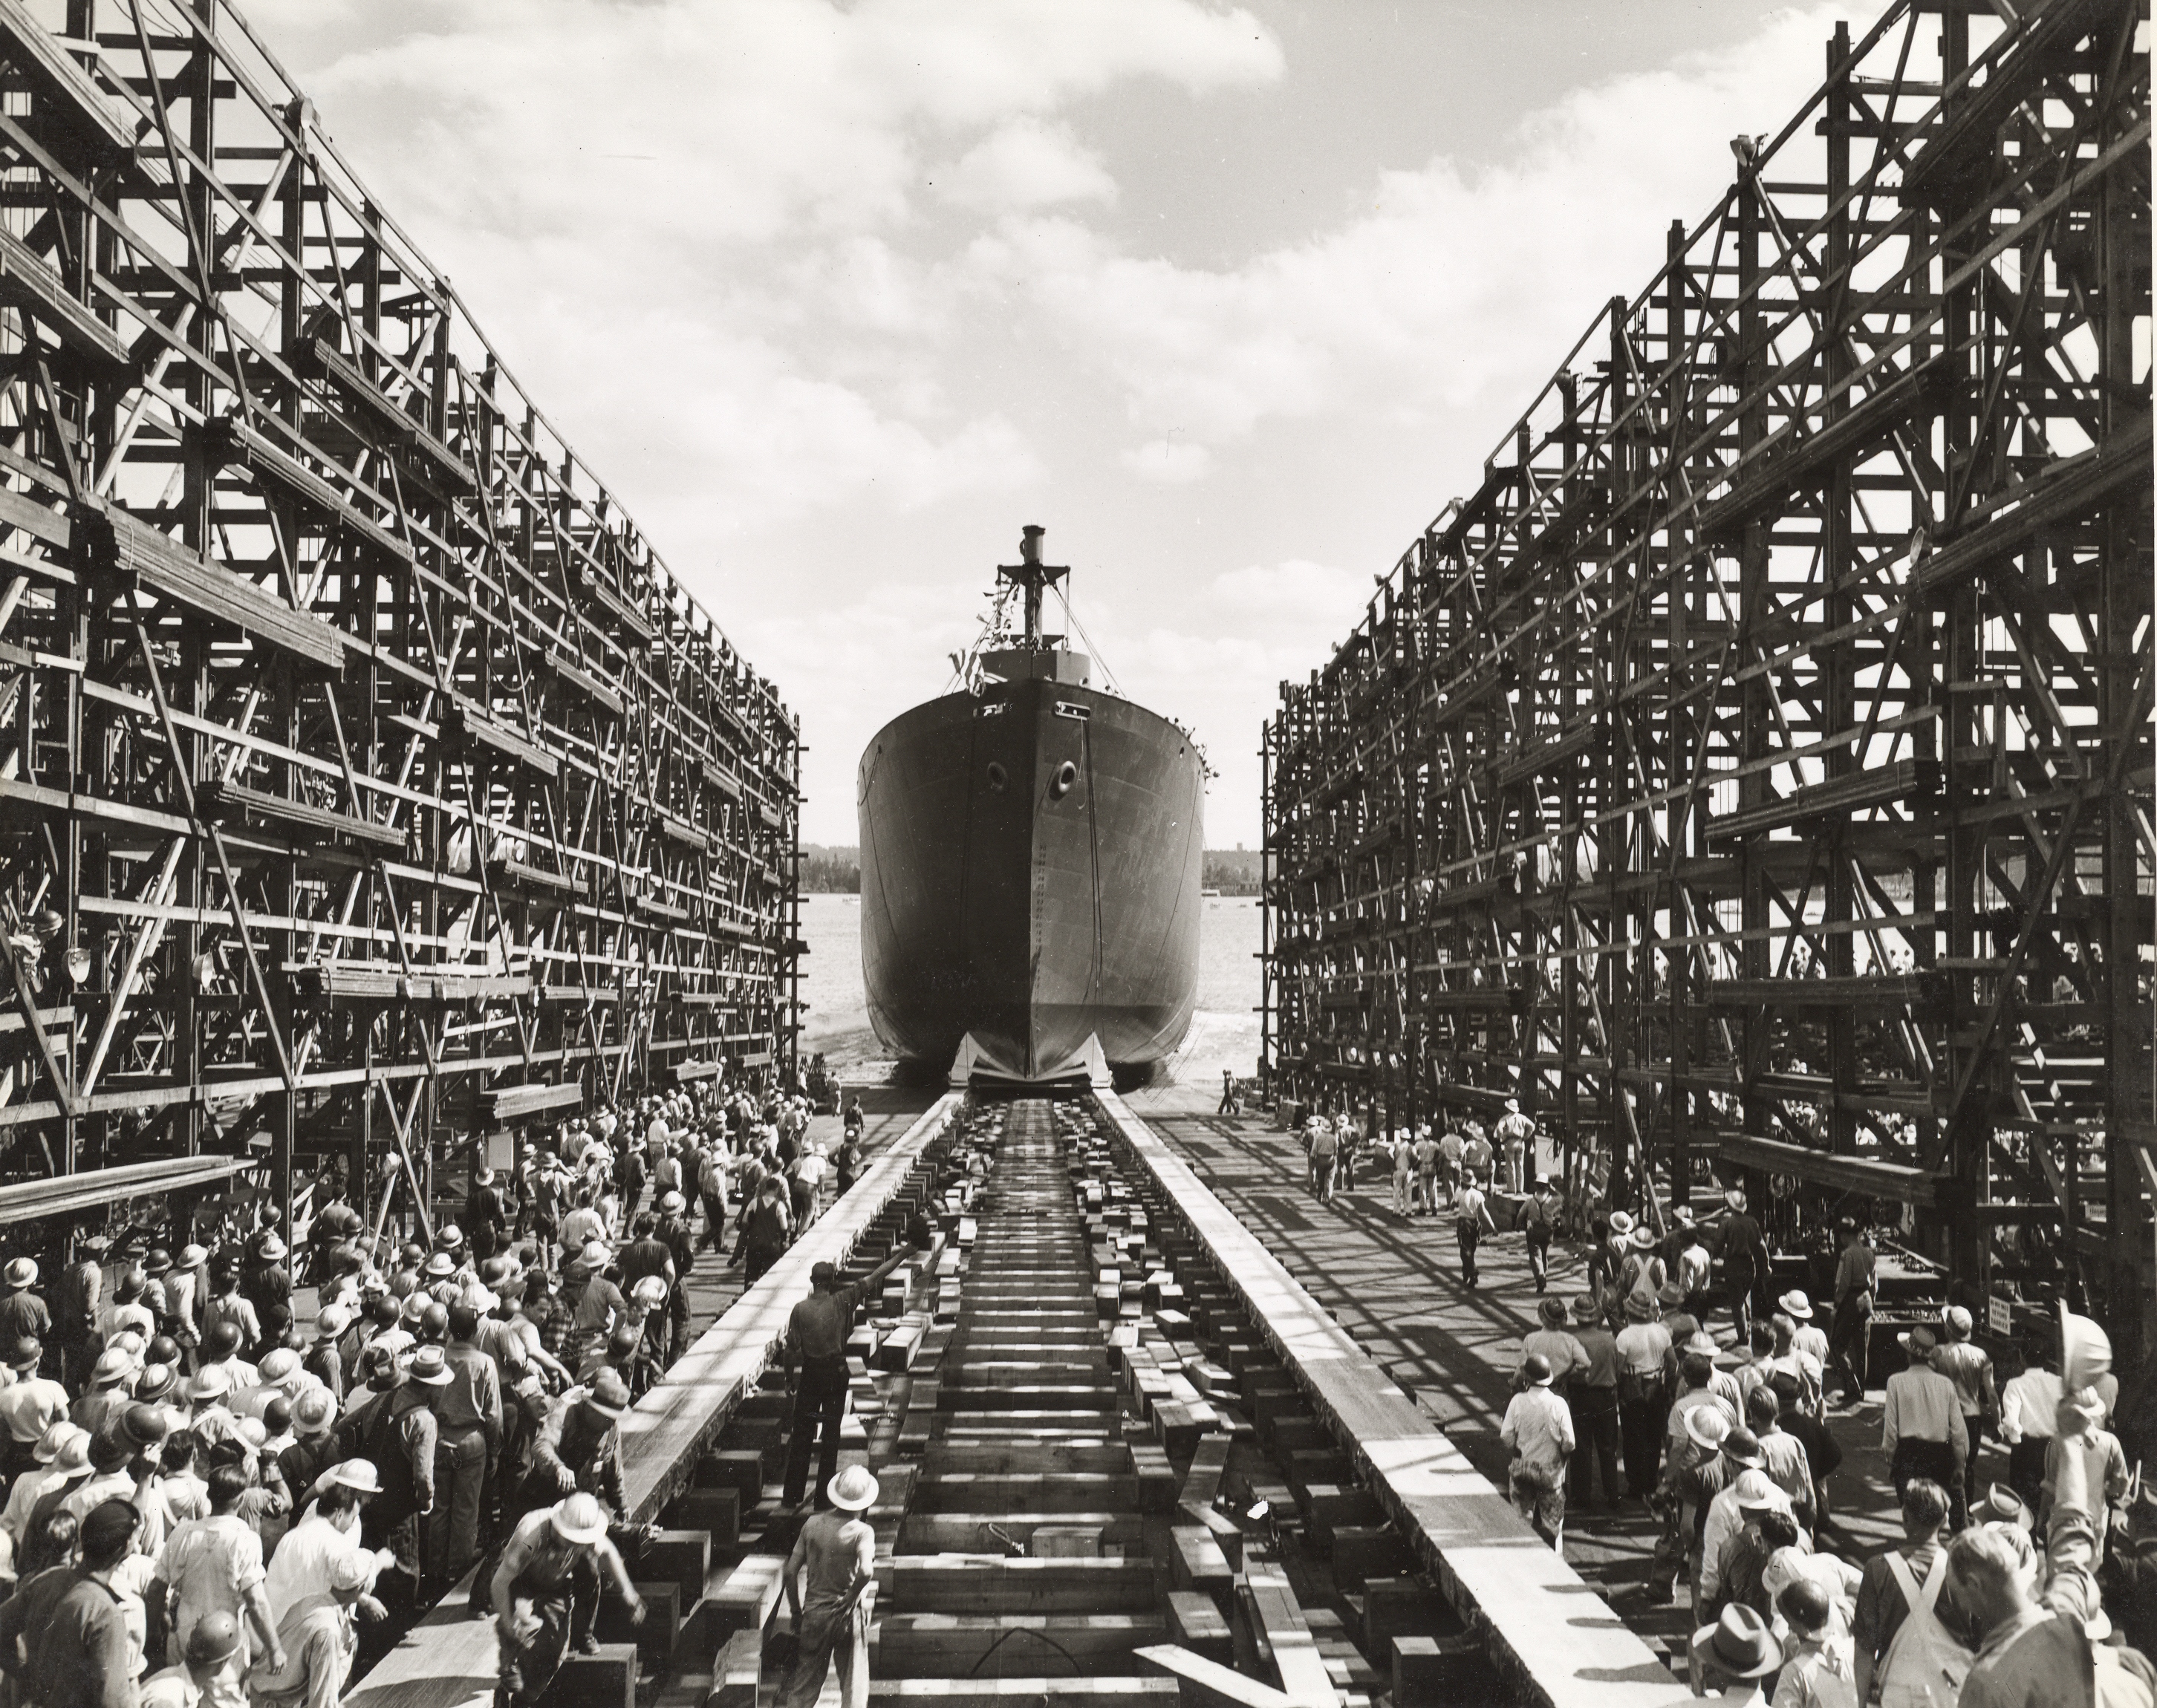 Ship launching from dry dock as workers look on